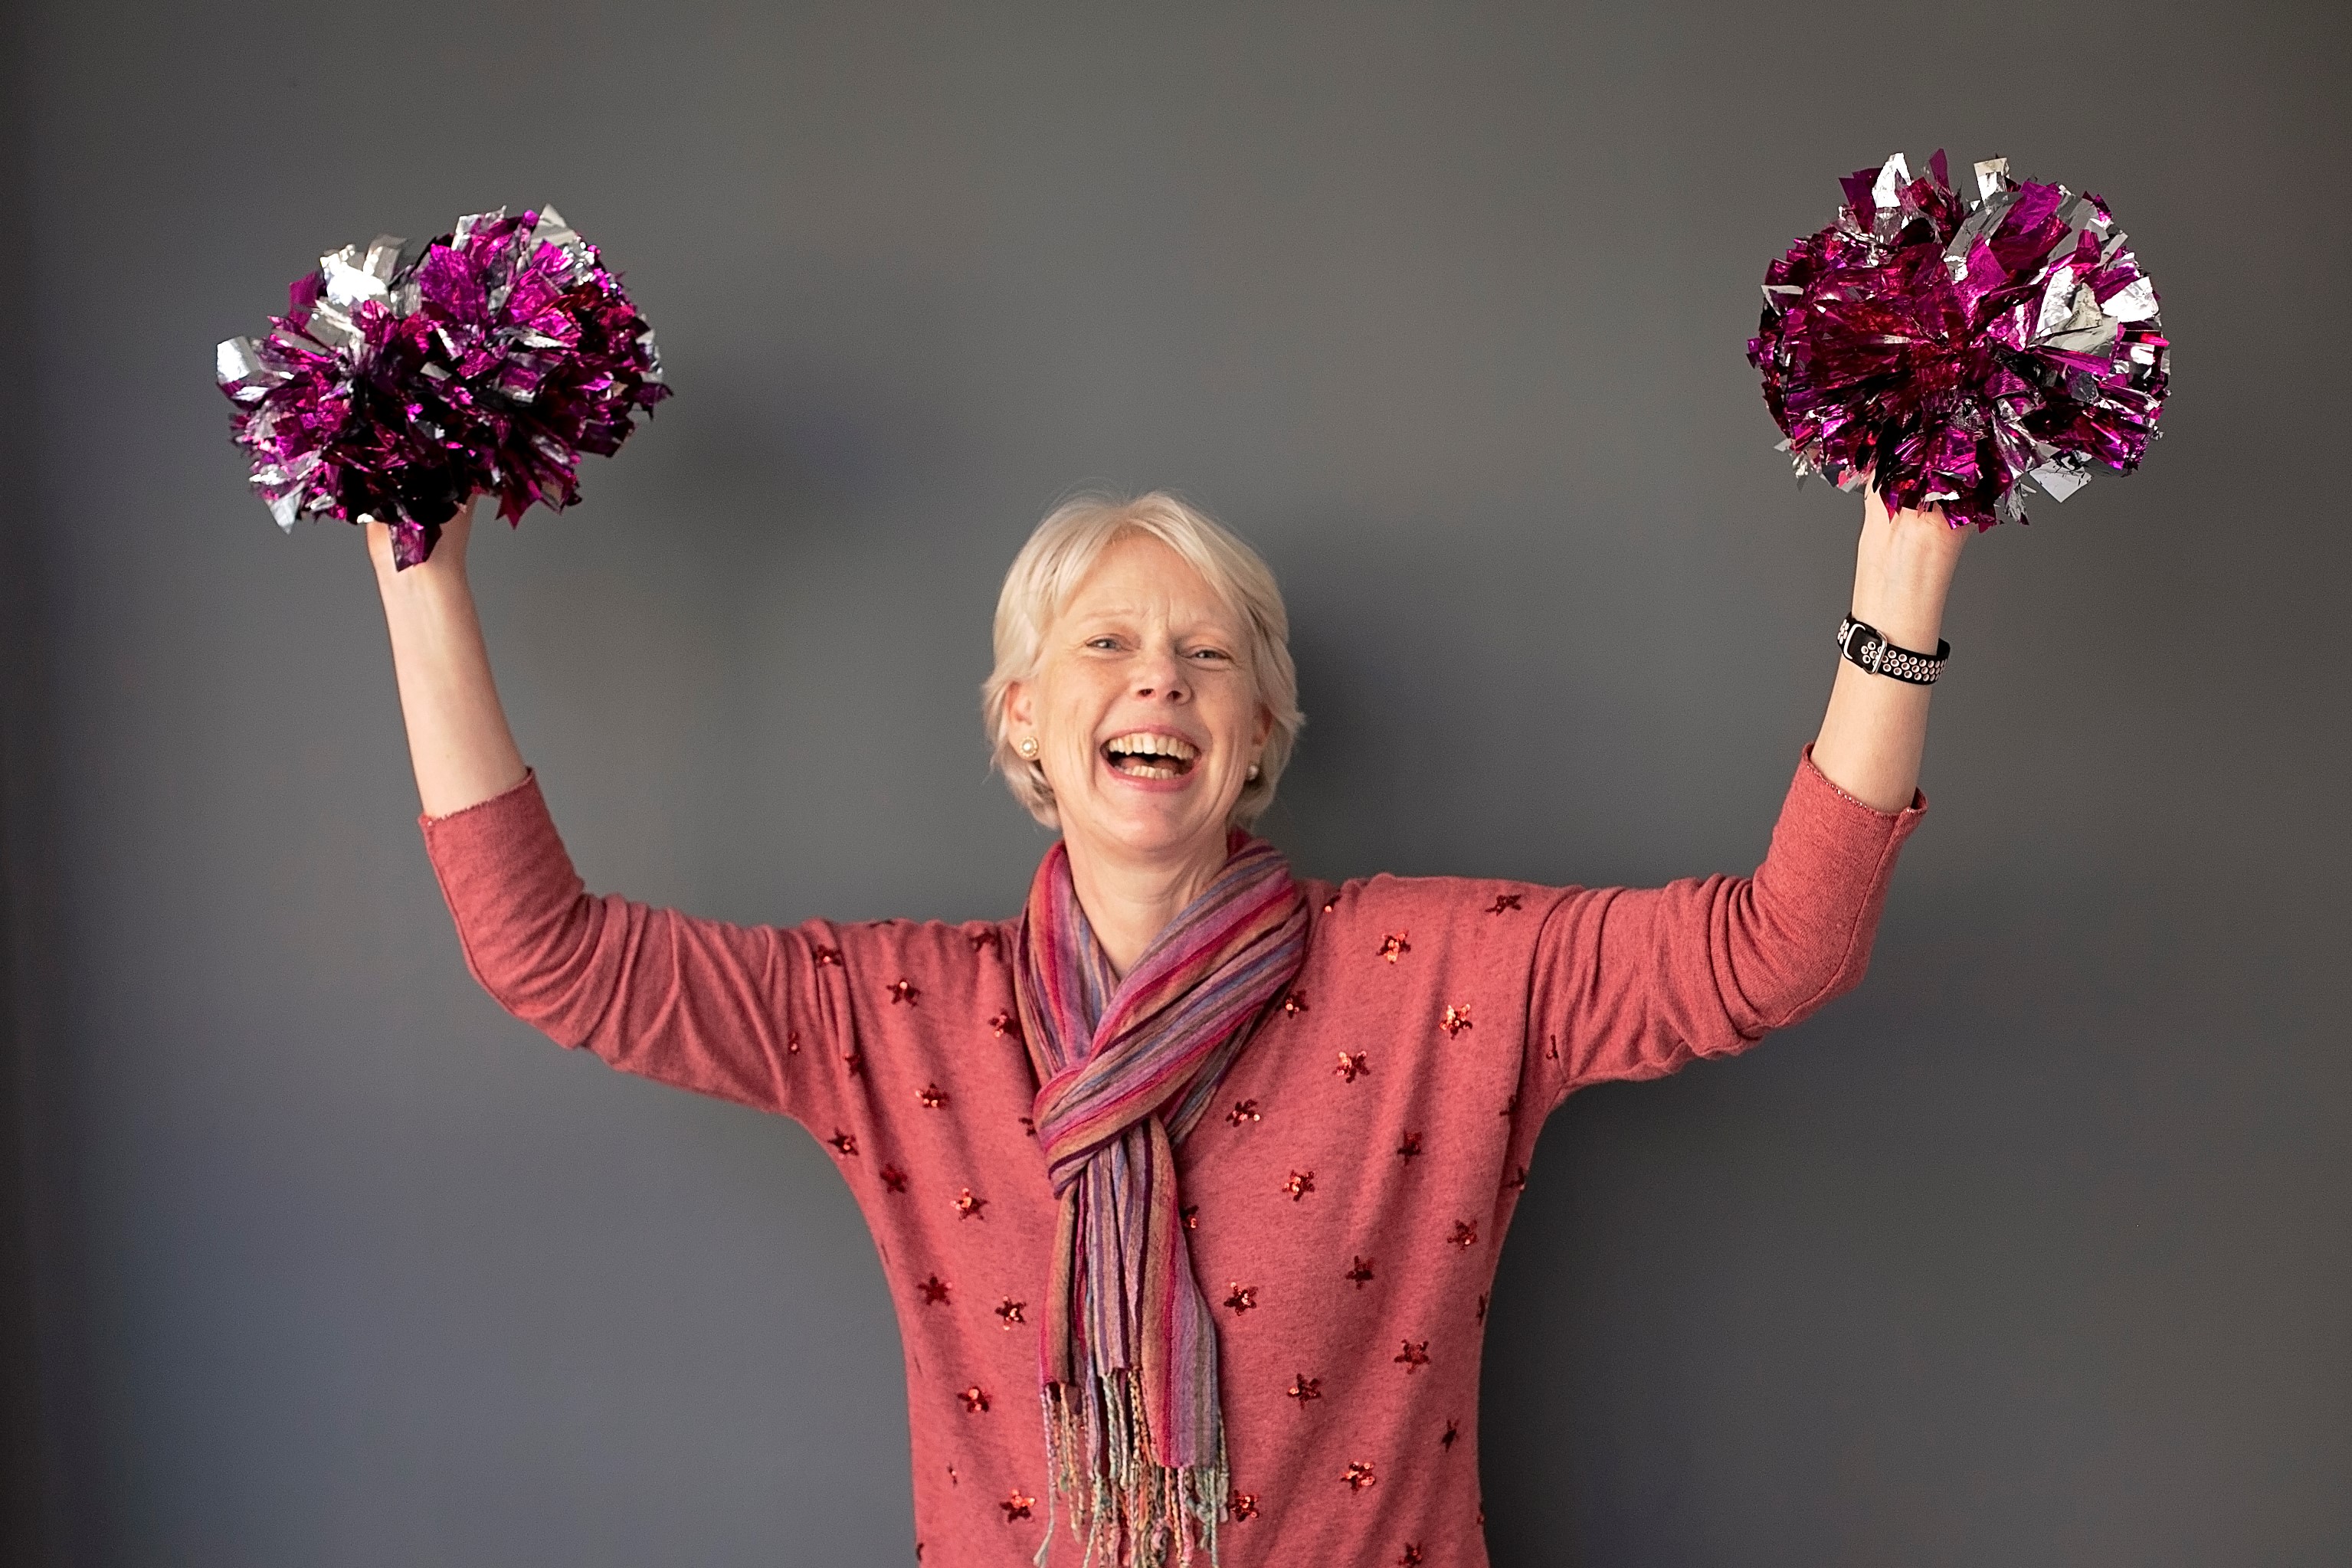 Susan Weeks online course creator online course coach cheering with pompoms